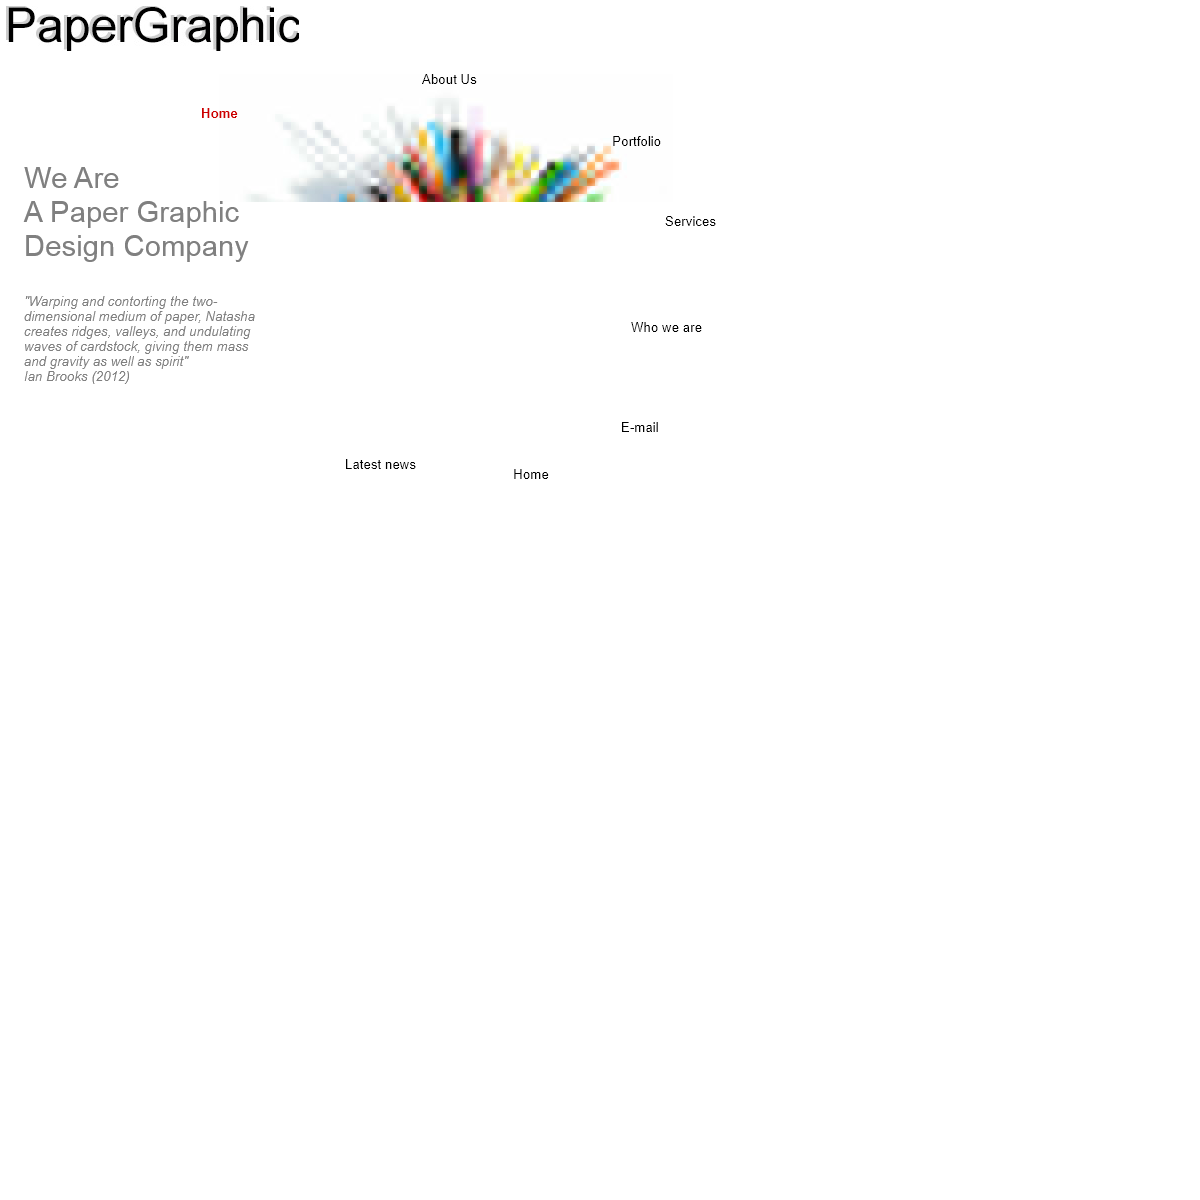 A complete backup of papergraphic.co.uk